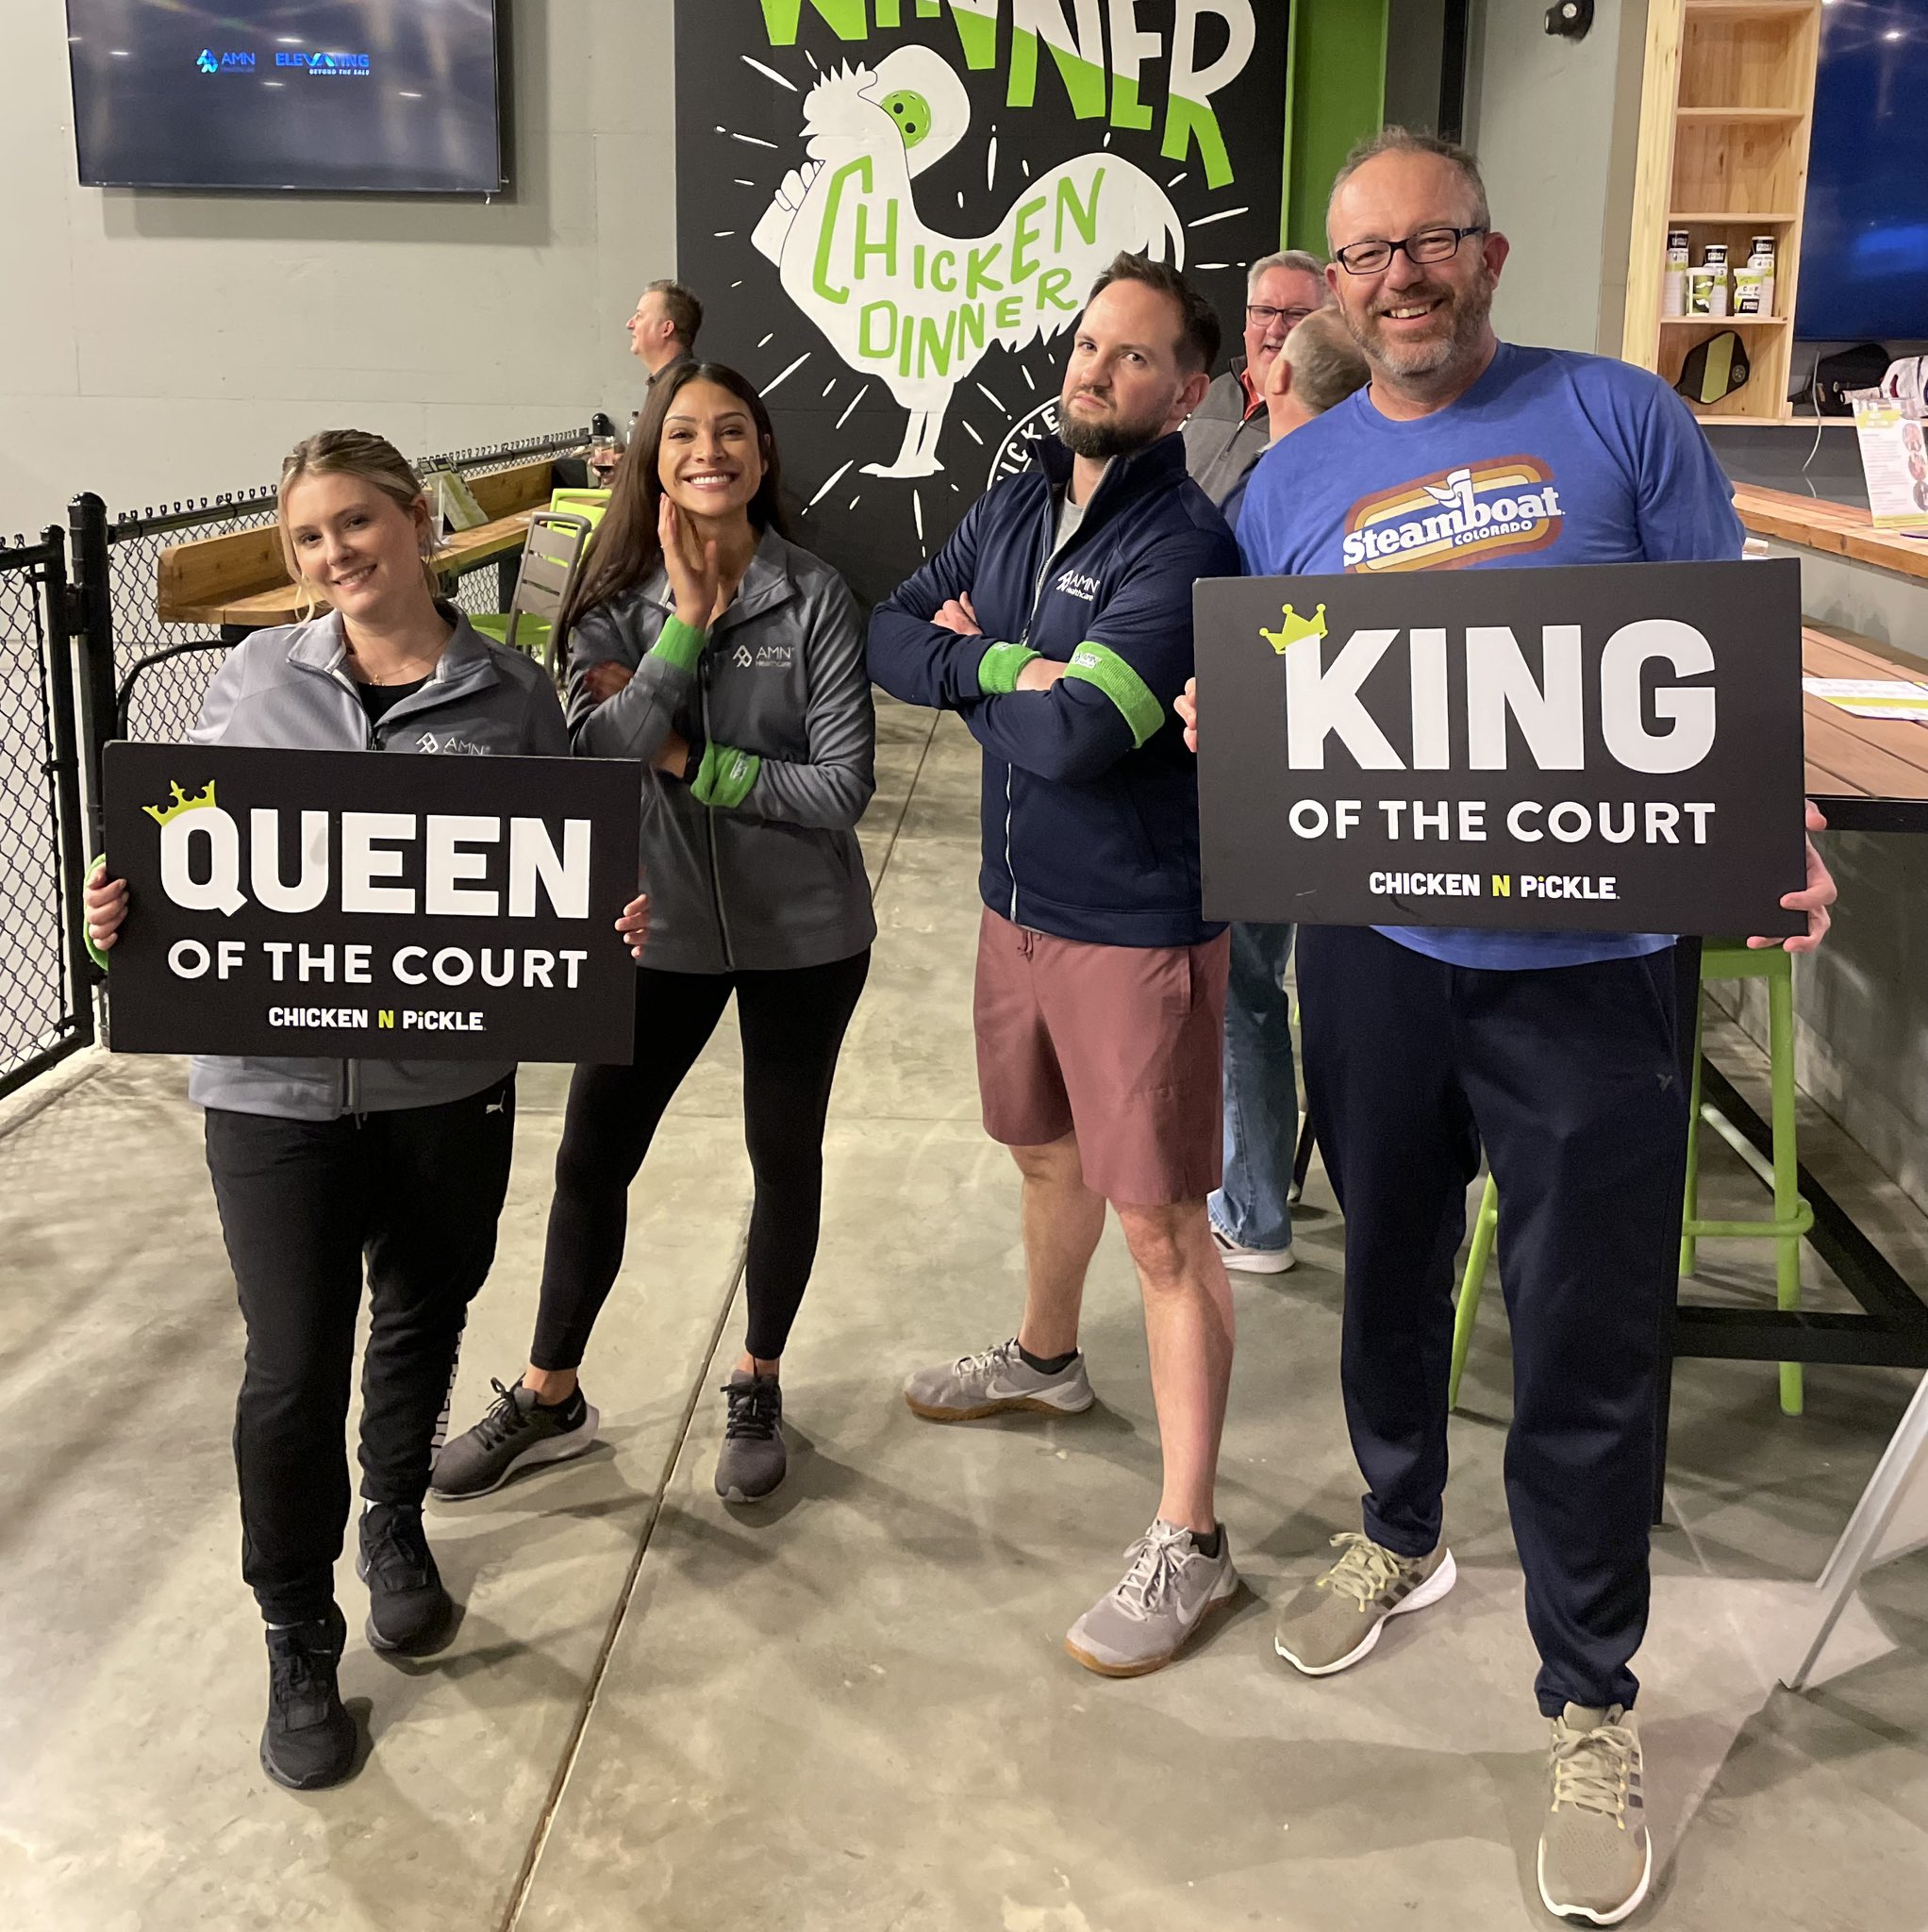 King/Queen of the Court - Chicken N Pickle